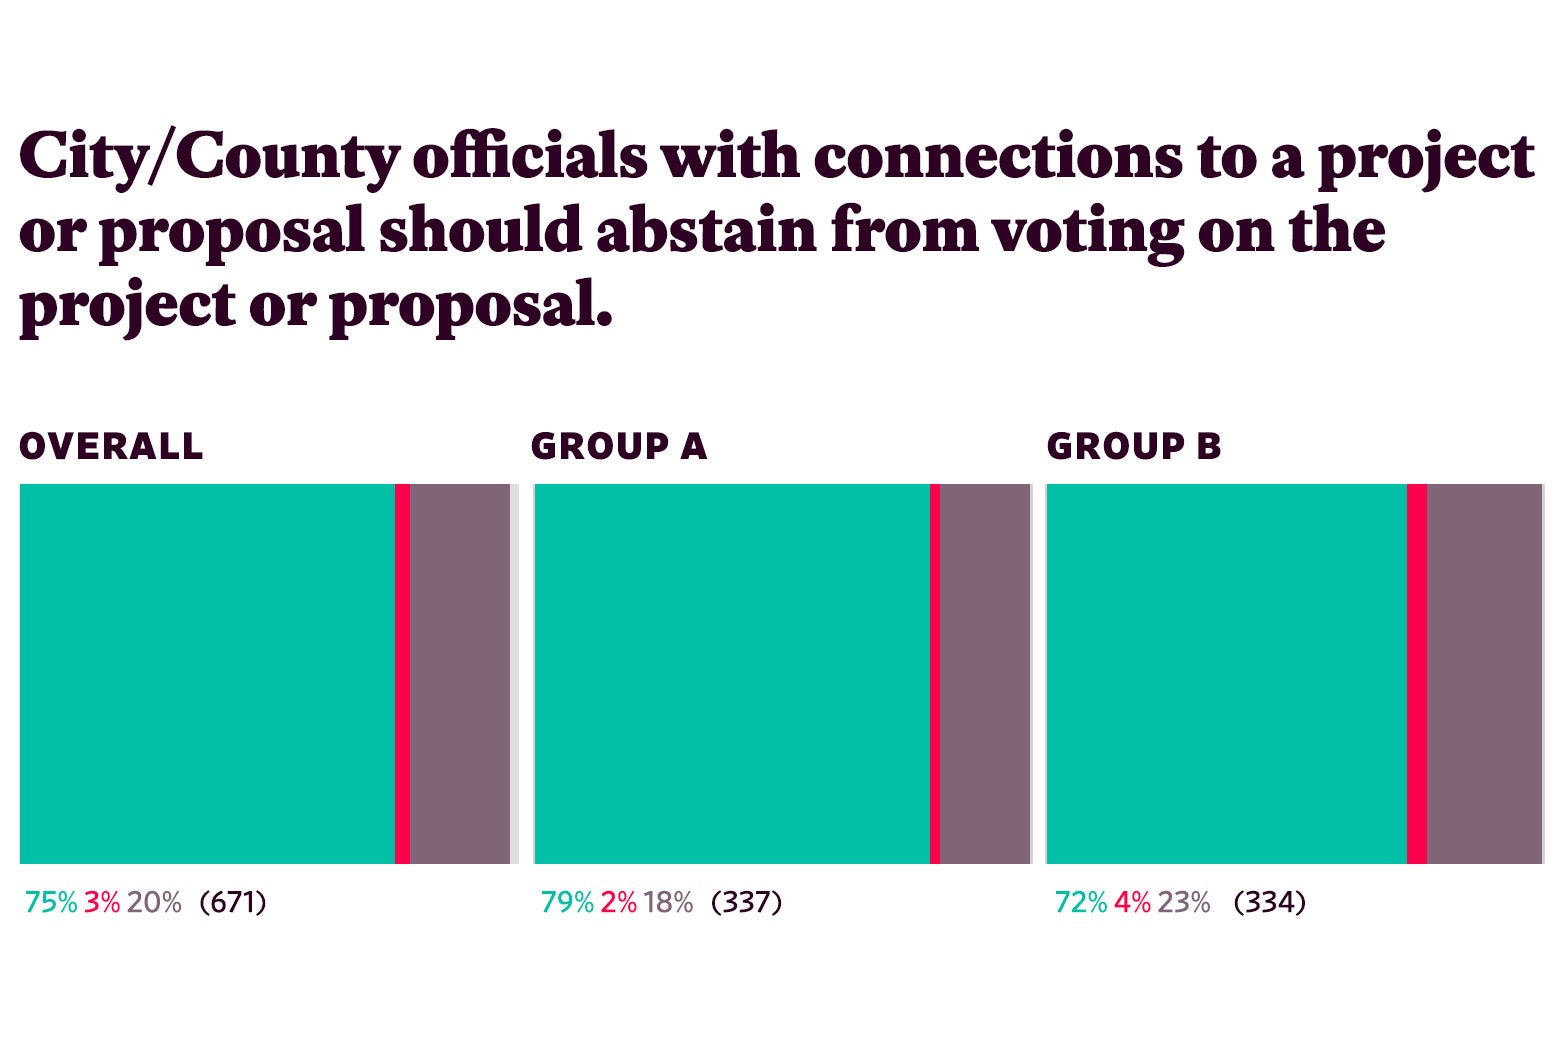 Responses to “City/County officials with connections to a project or proposal should abstain from voting on the project or proposal.”